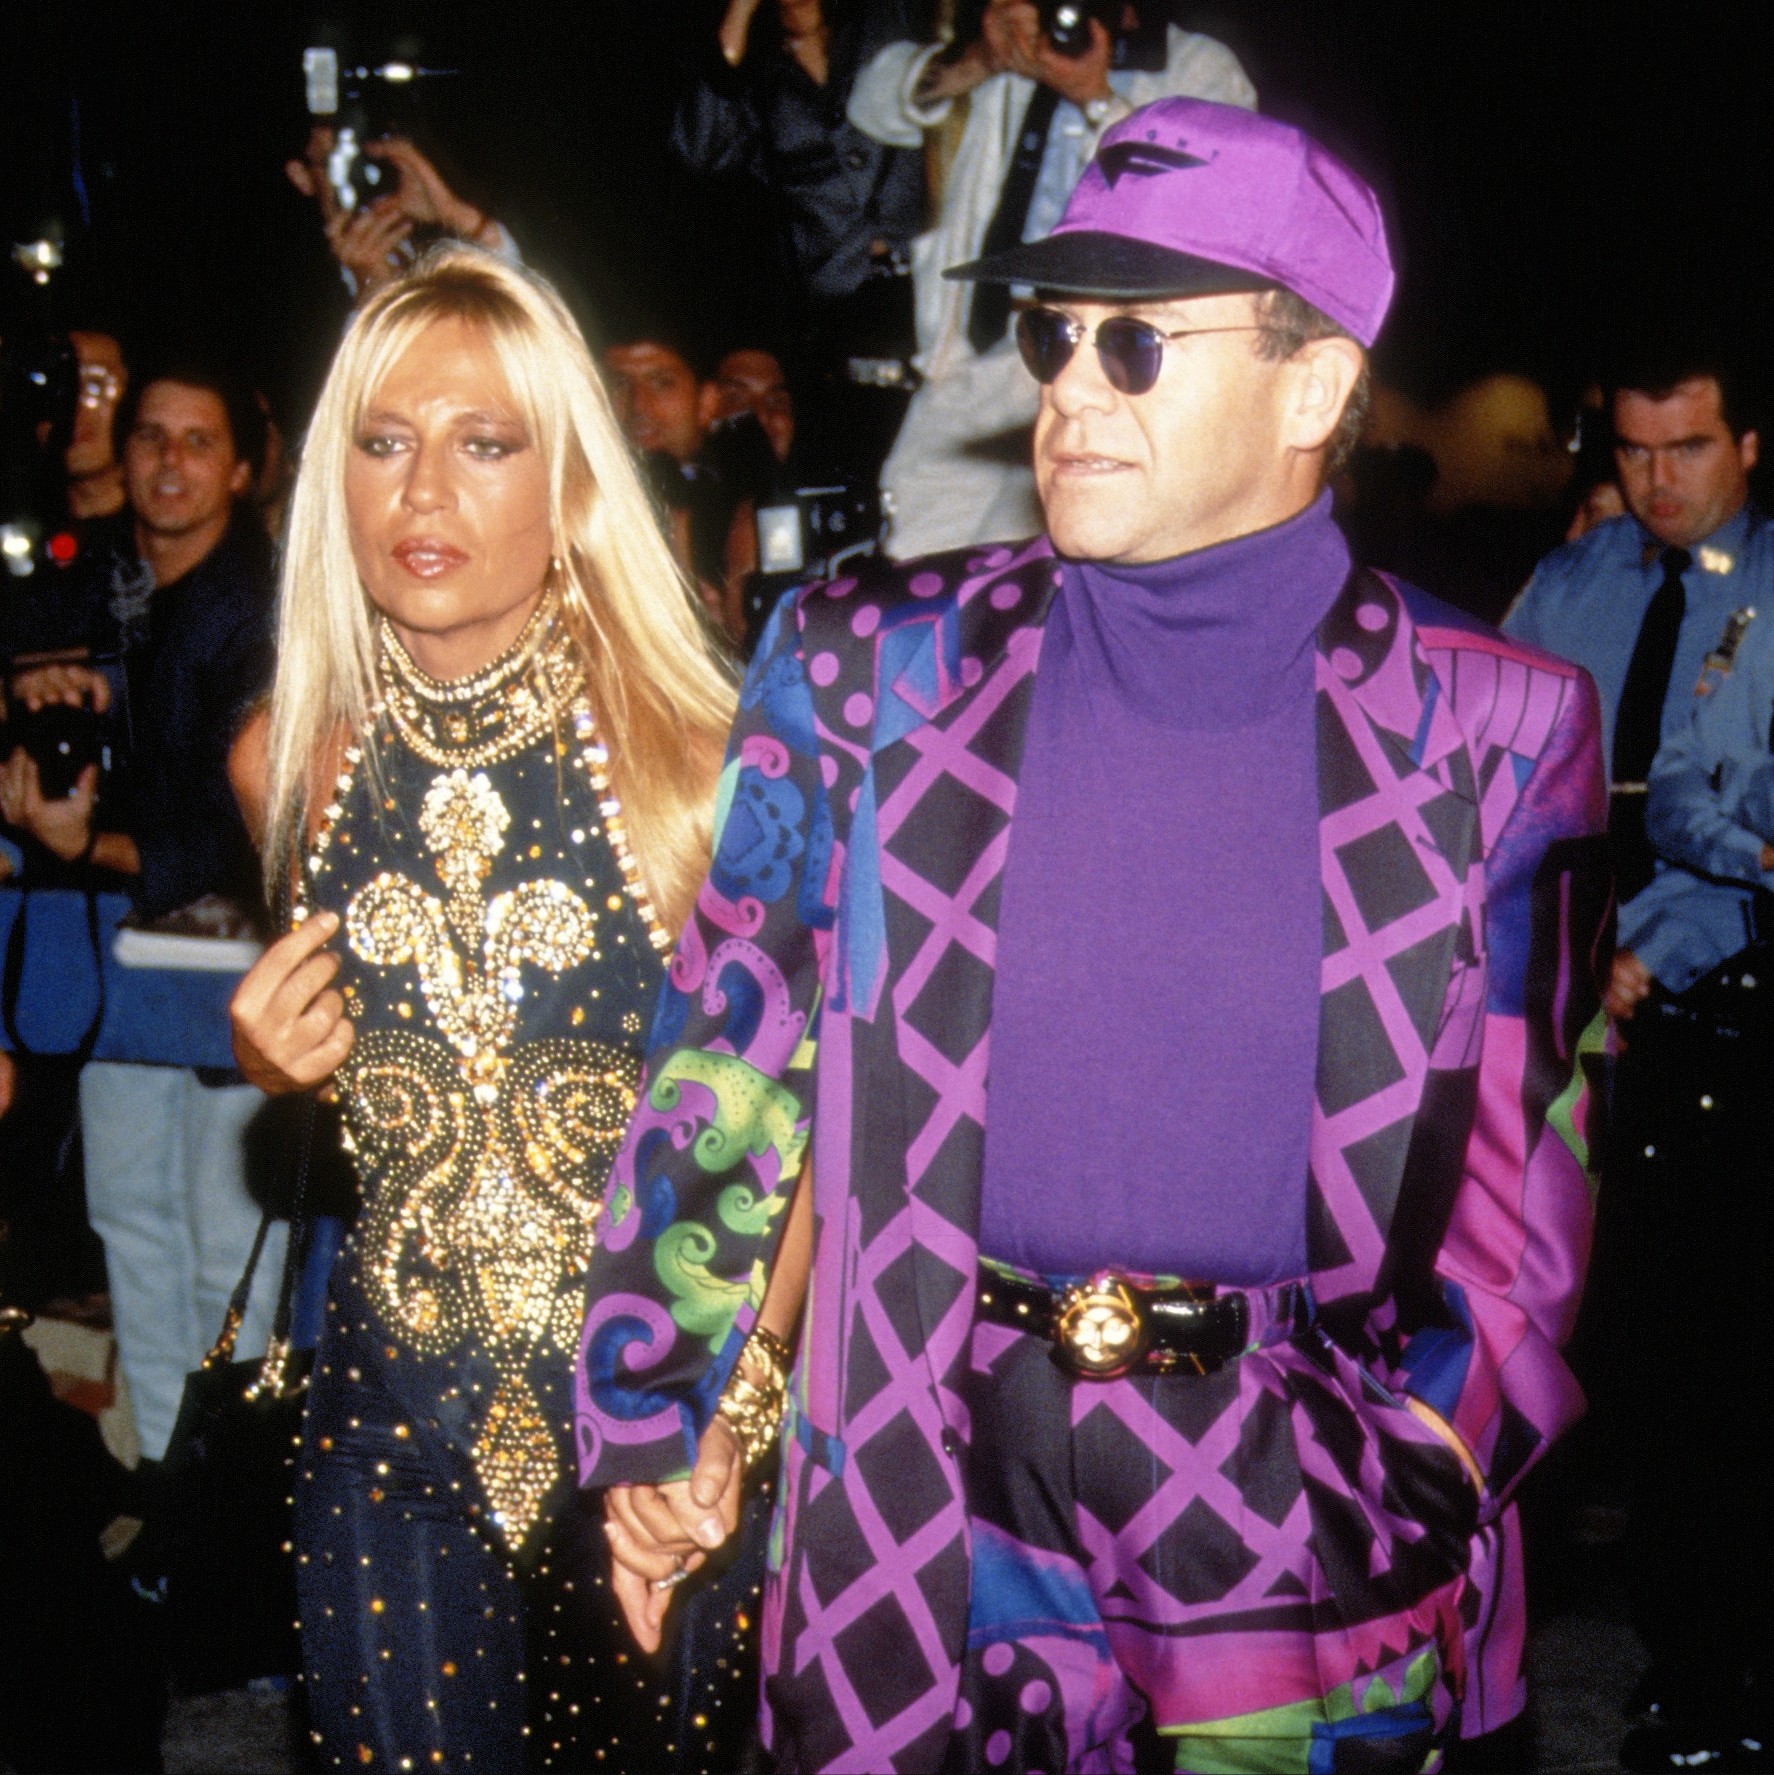 trog Vroeg Gehakt 7 of Donatella Versace's most iconic outfits